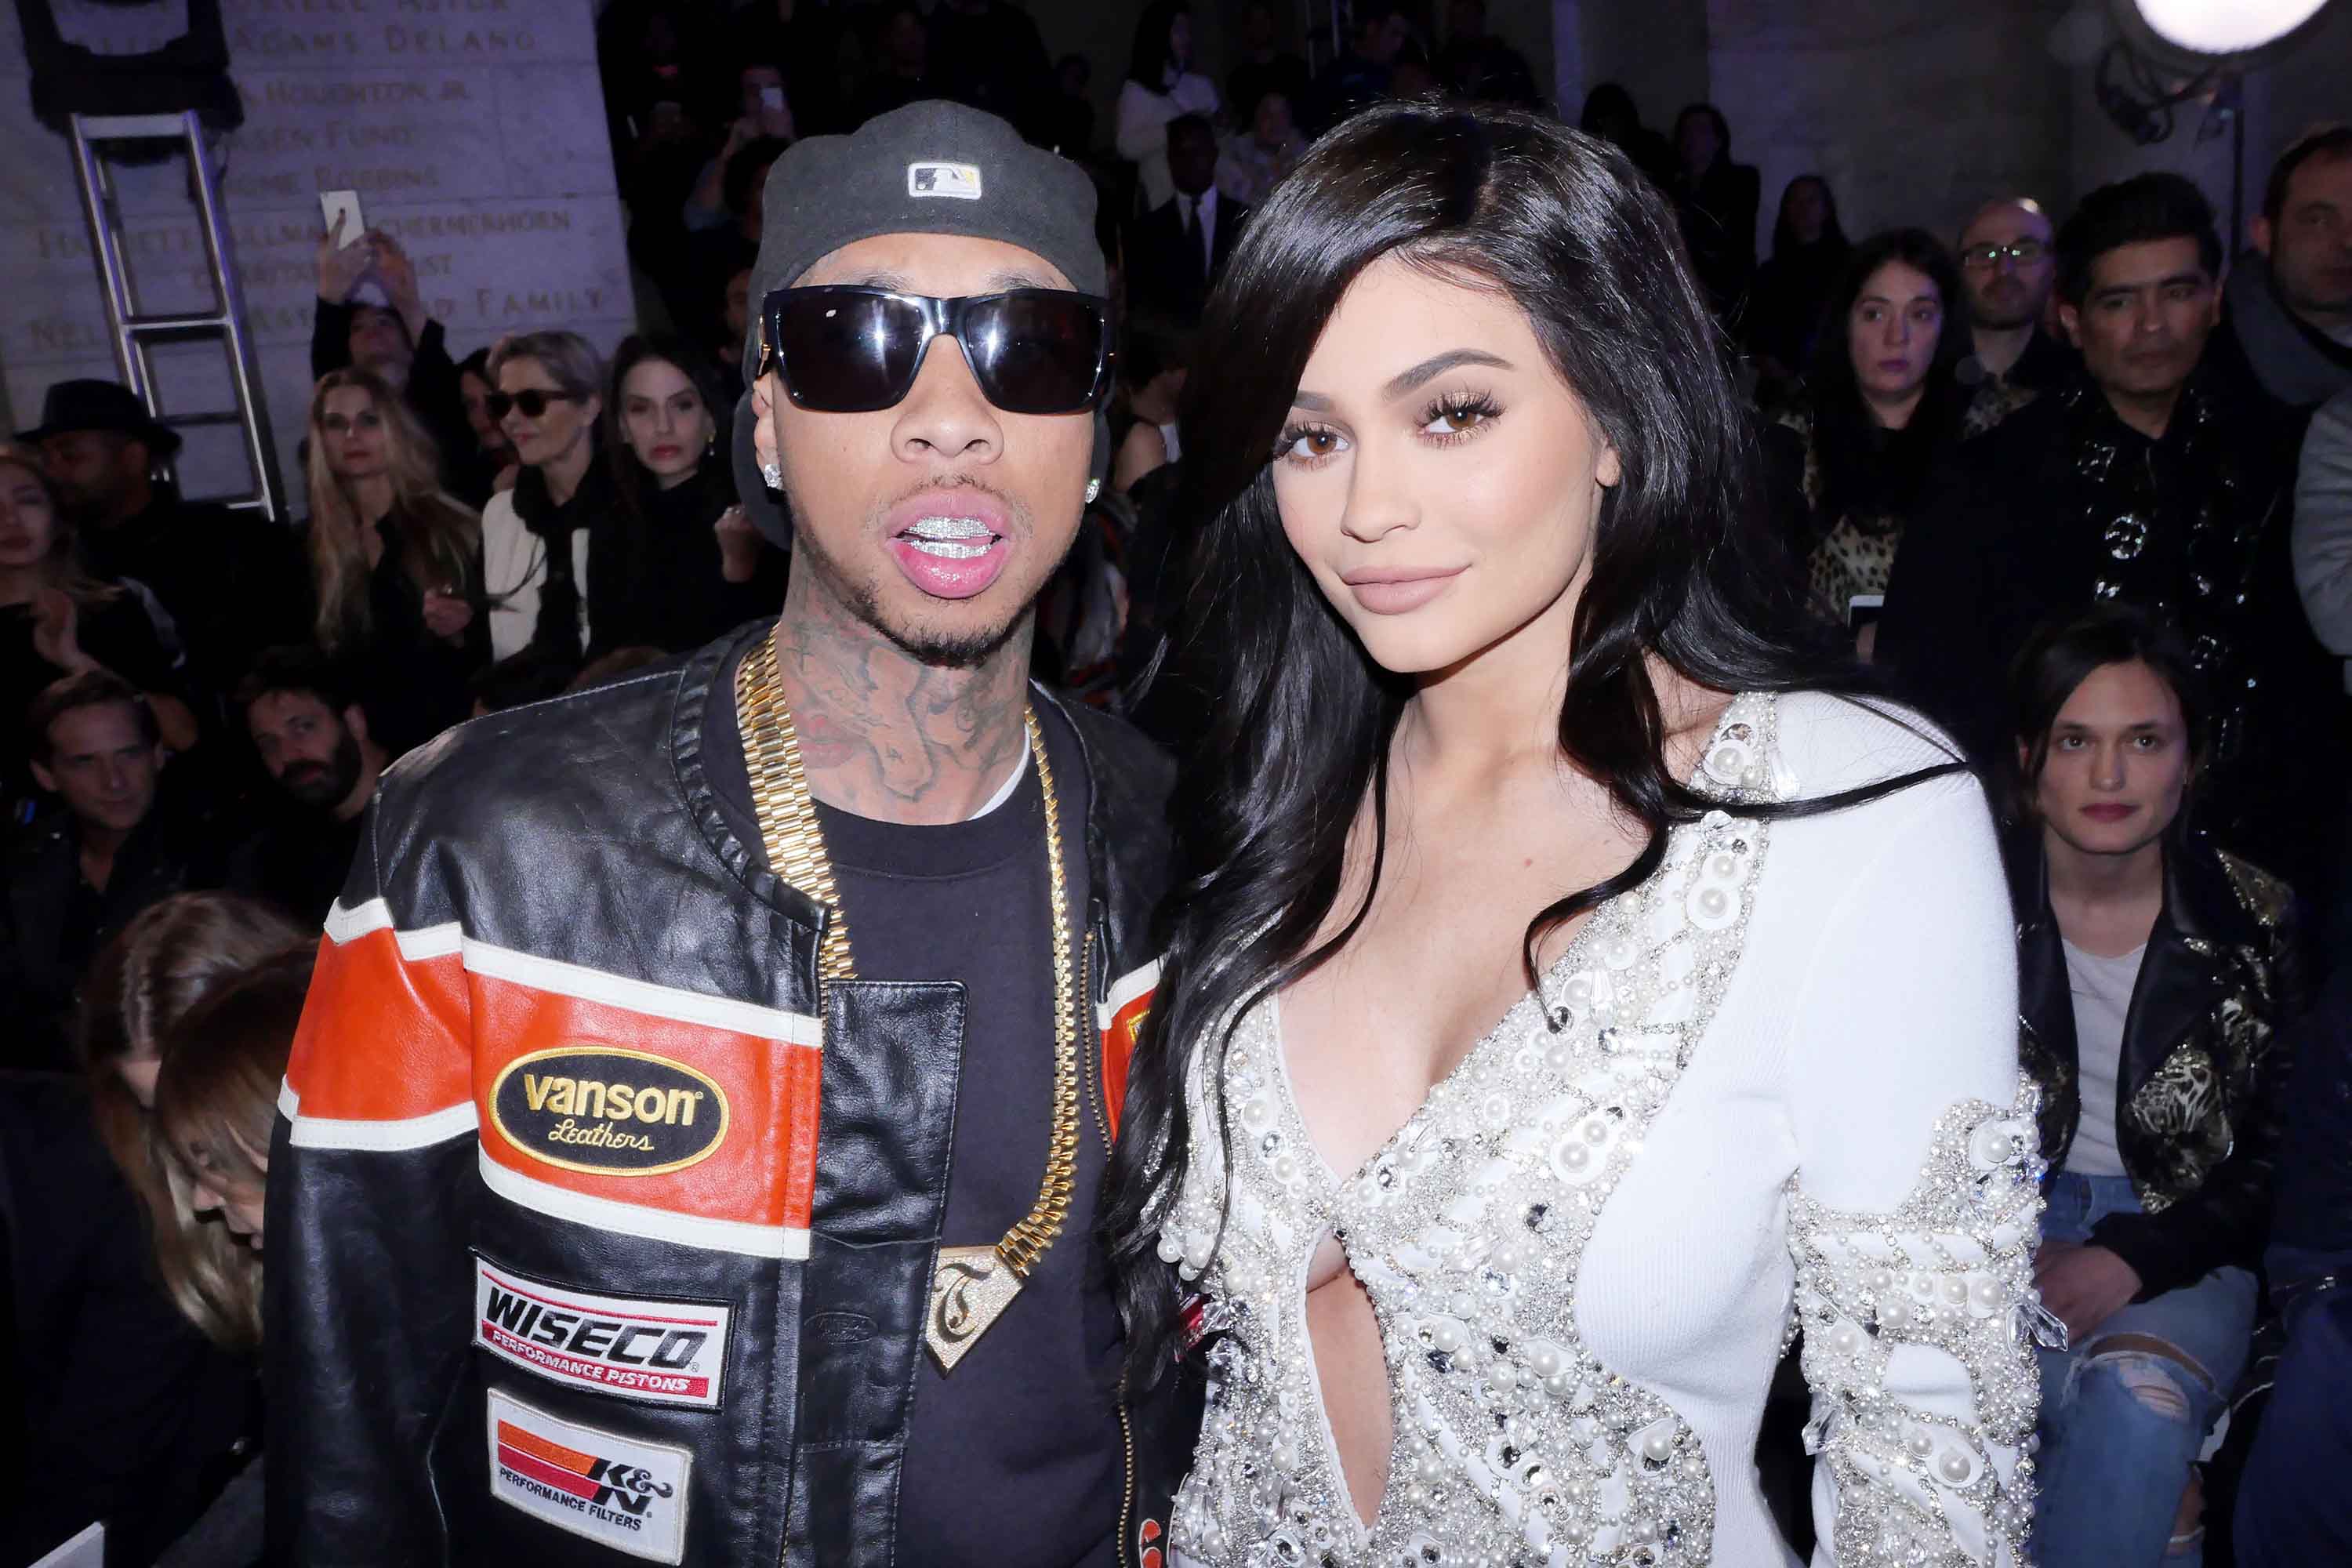 Old Fathar Rep Sex Video Dauchter Kichan - No, Tyga is not Kylie Jenner's baby daddy | CNN